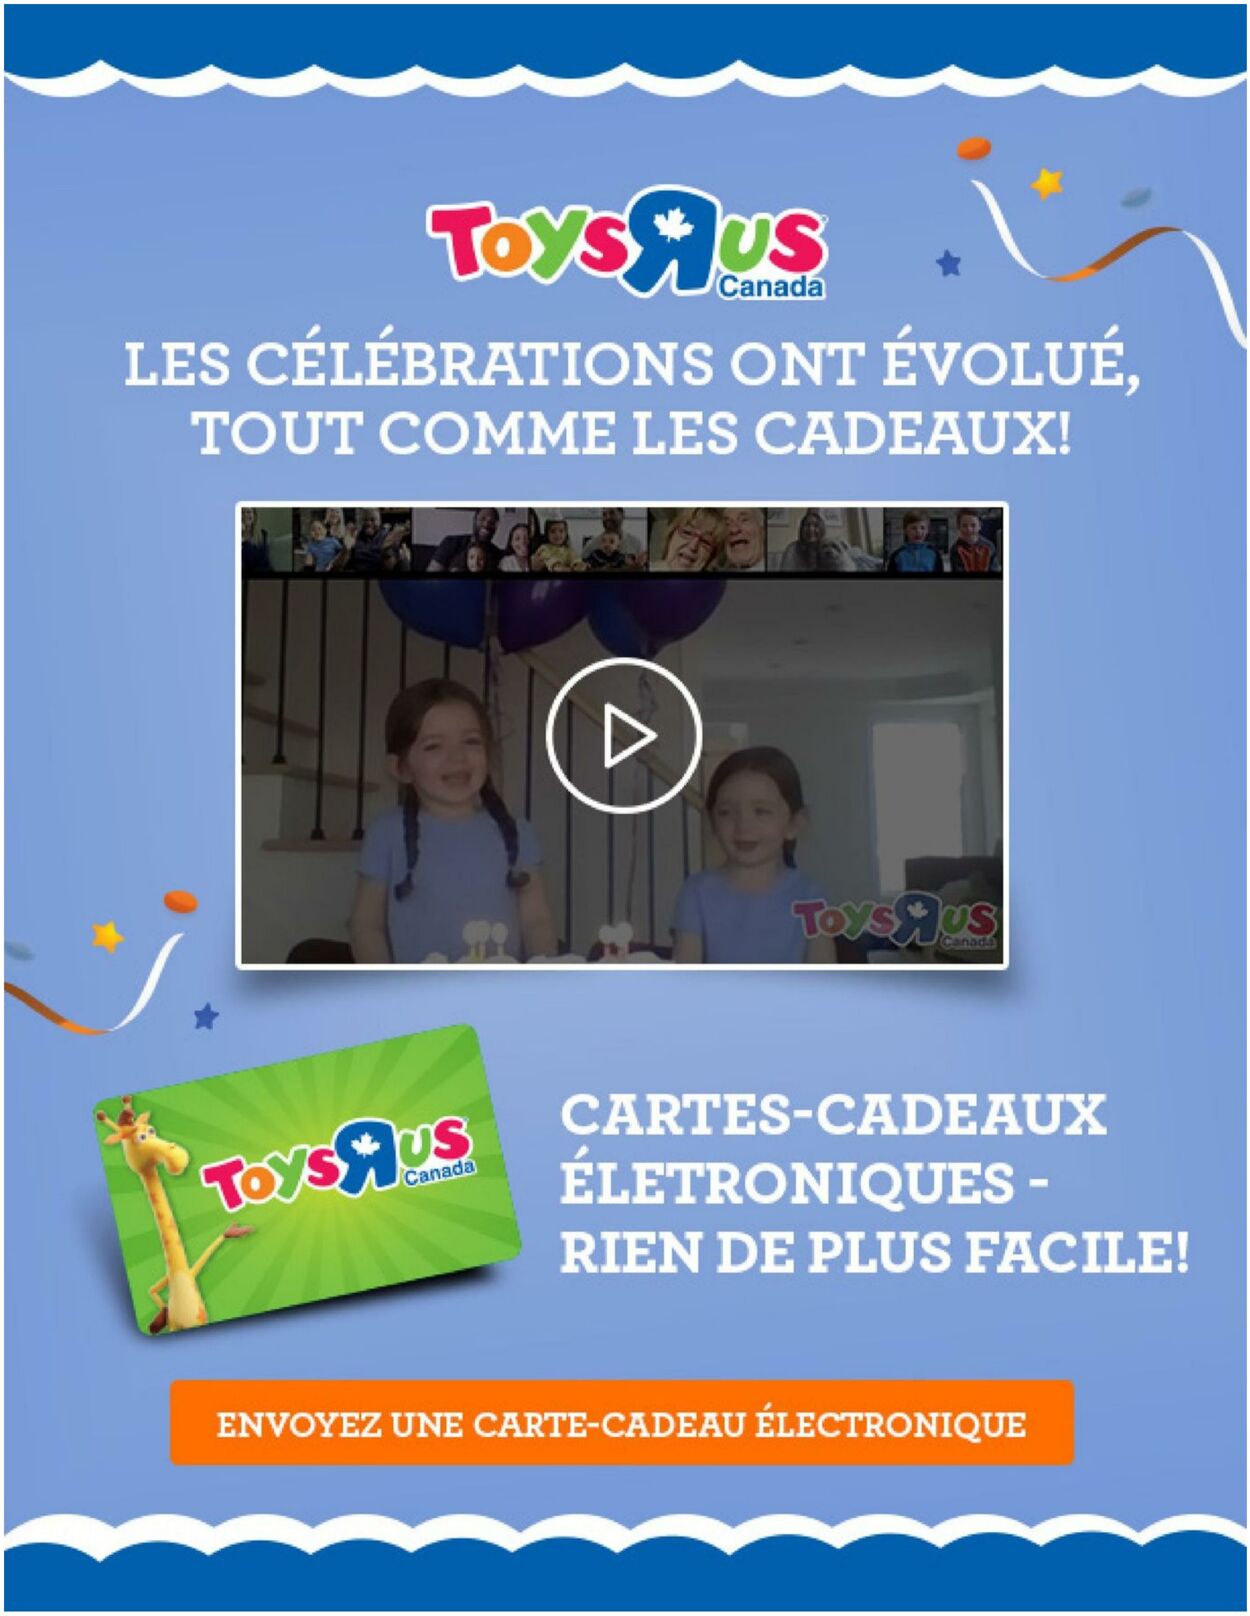 Circulaire Toys’R’Us 12.05.2022 - 23.05.2022